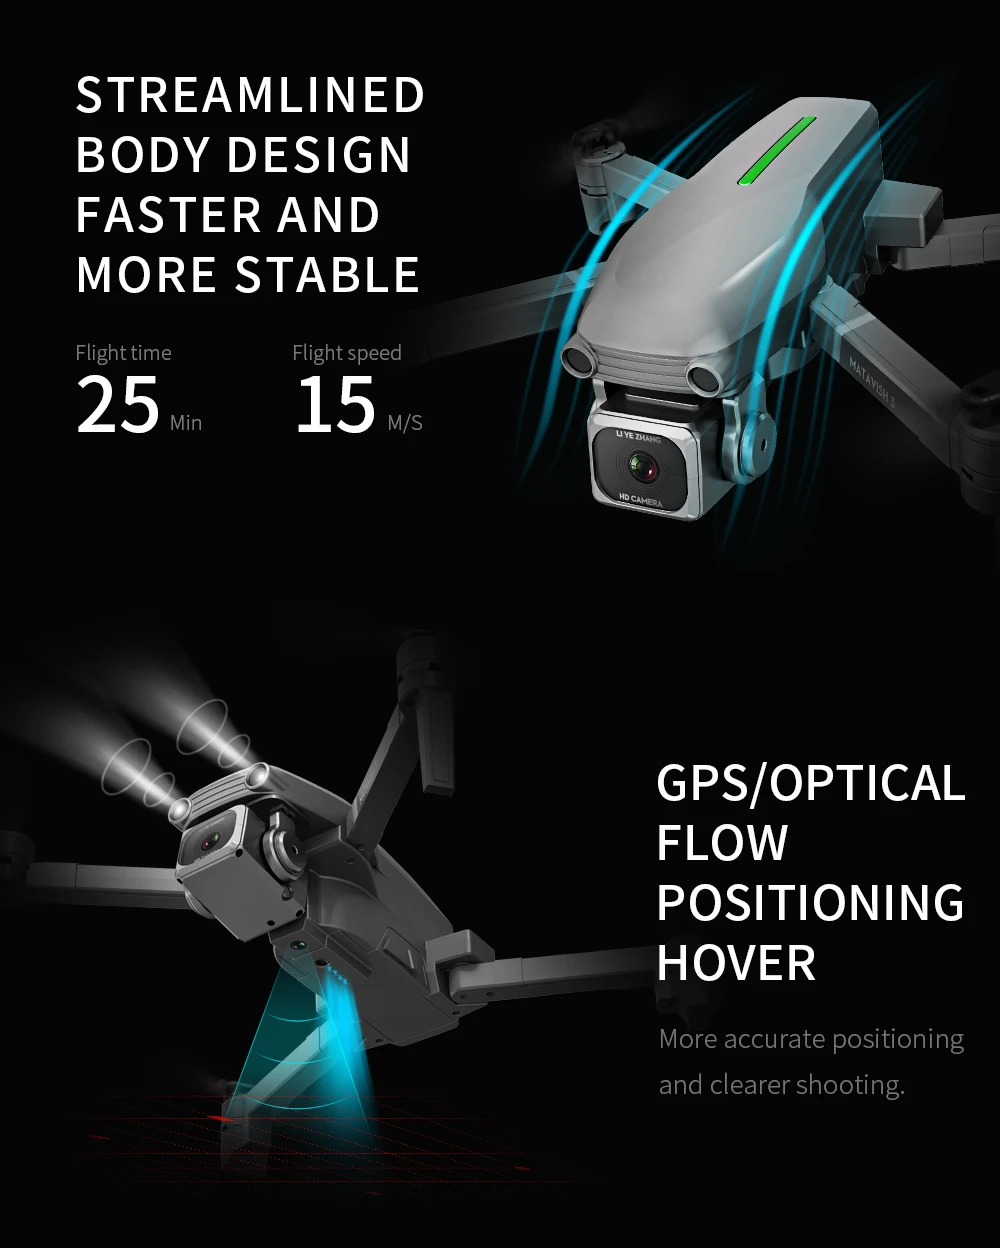 L109 GPS Drone 4K x50 ZOOM HD Camera 5G WIFI Gesture photo Low power return Professional Quadcopter RC Helicopter VS SG907 E58